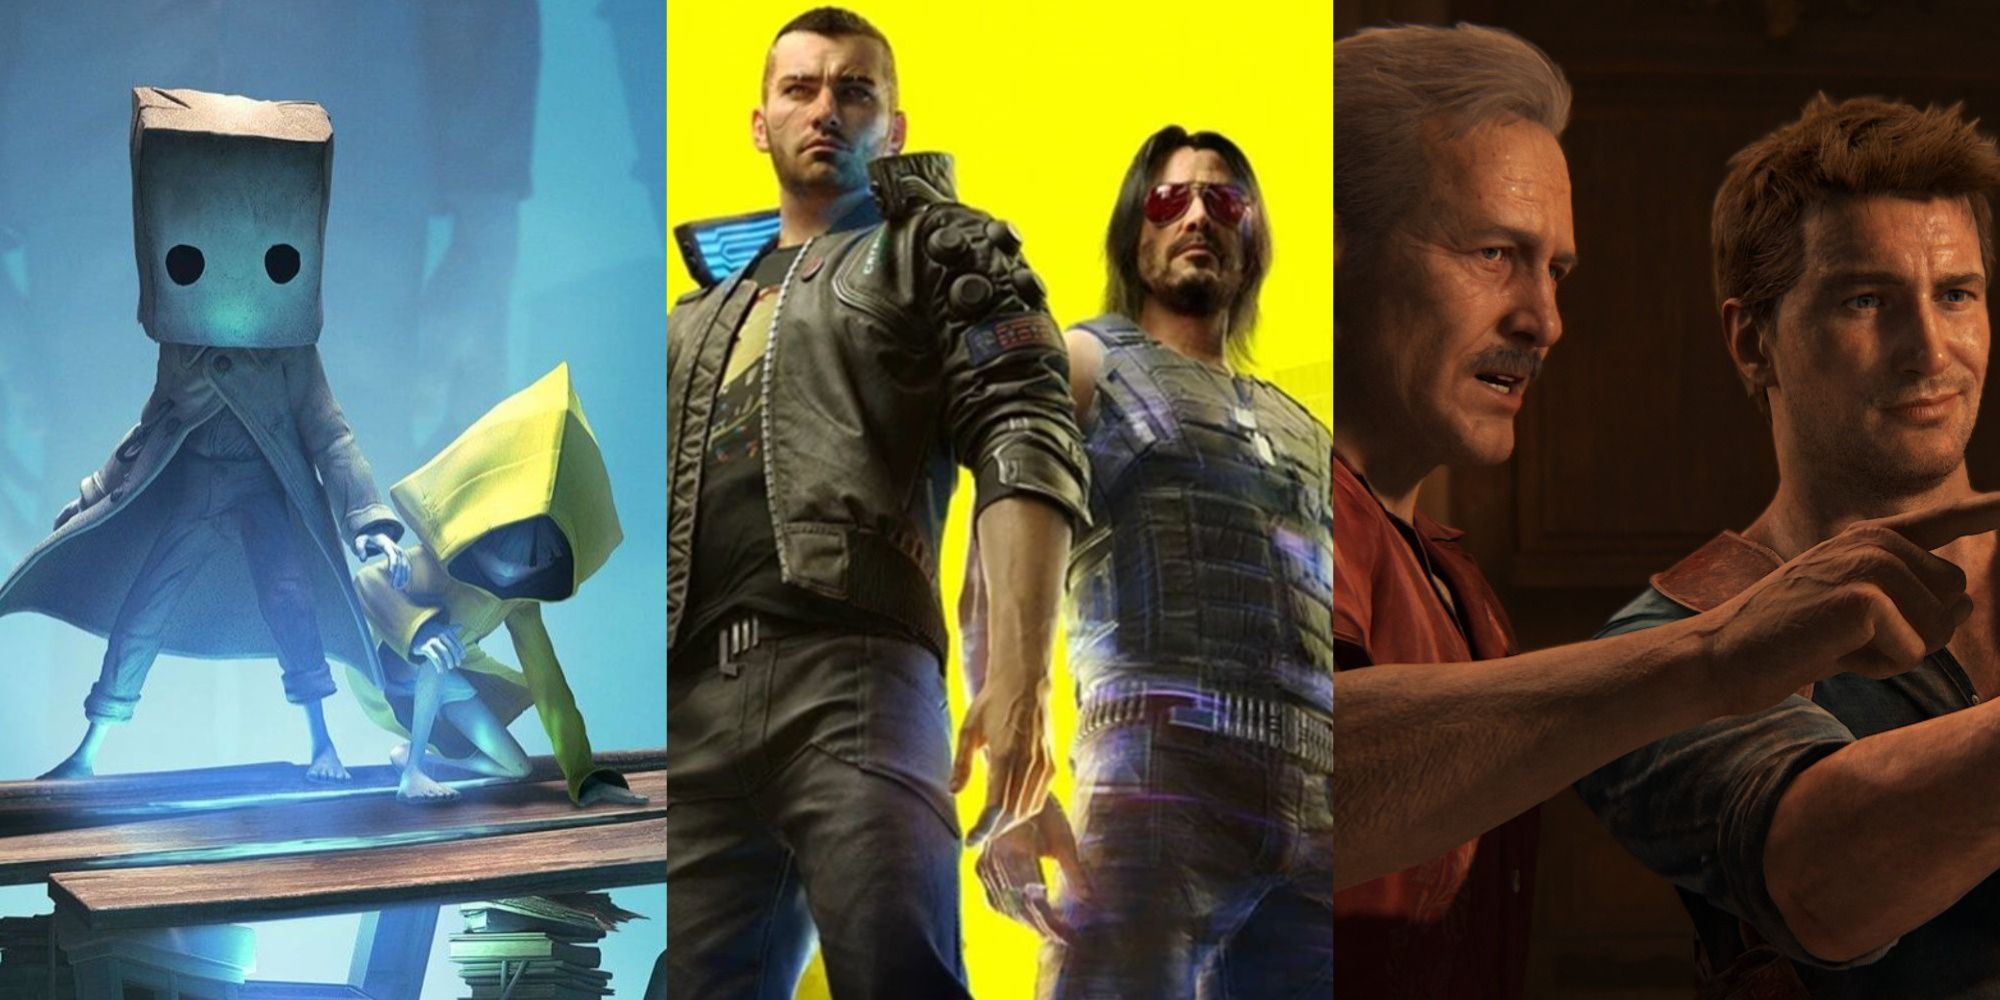 Little Nightmares 2, Cyberpunk 2077, and Uncharted duos